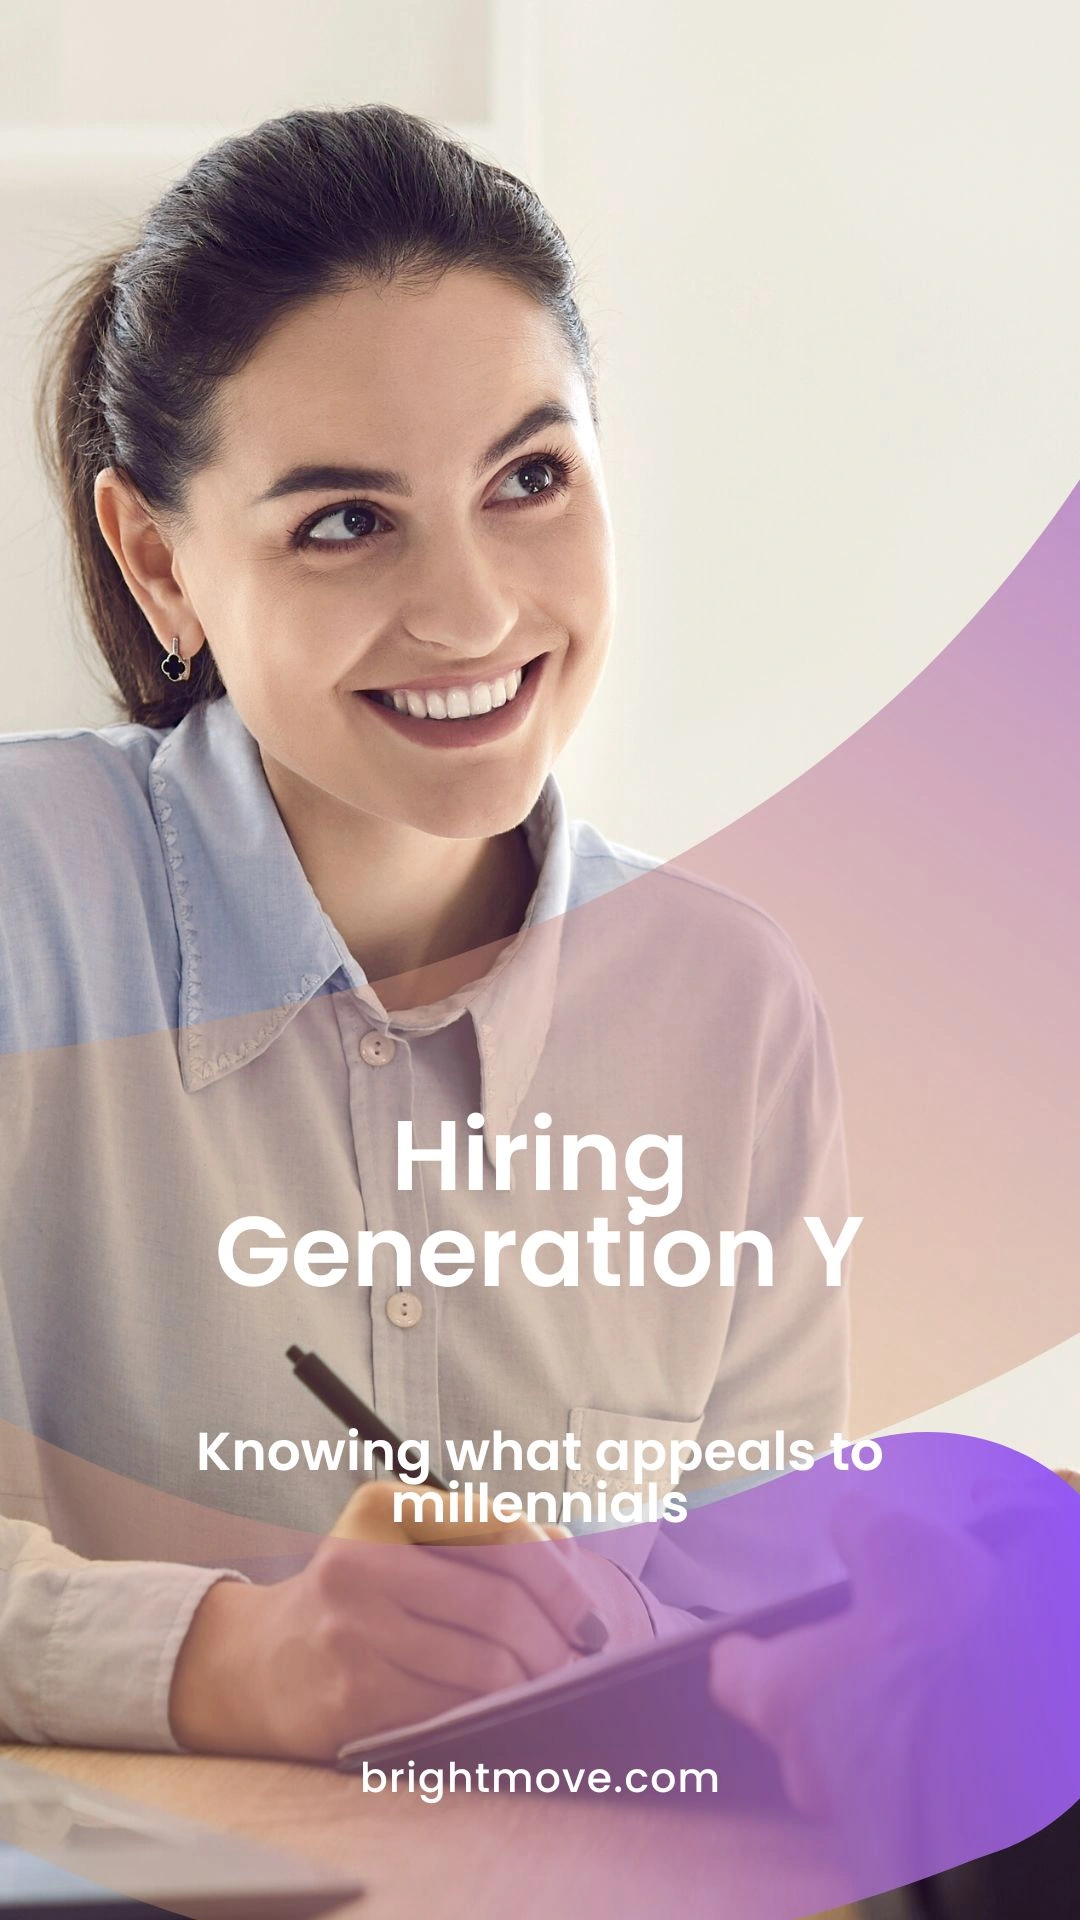 Hiring Generation Y: Knowing What Appeals To Millennials